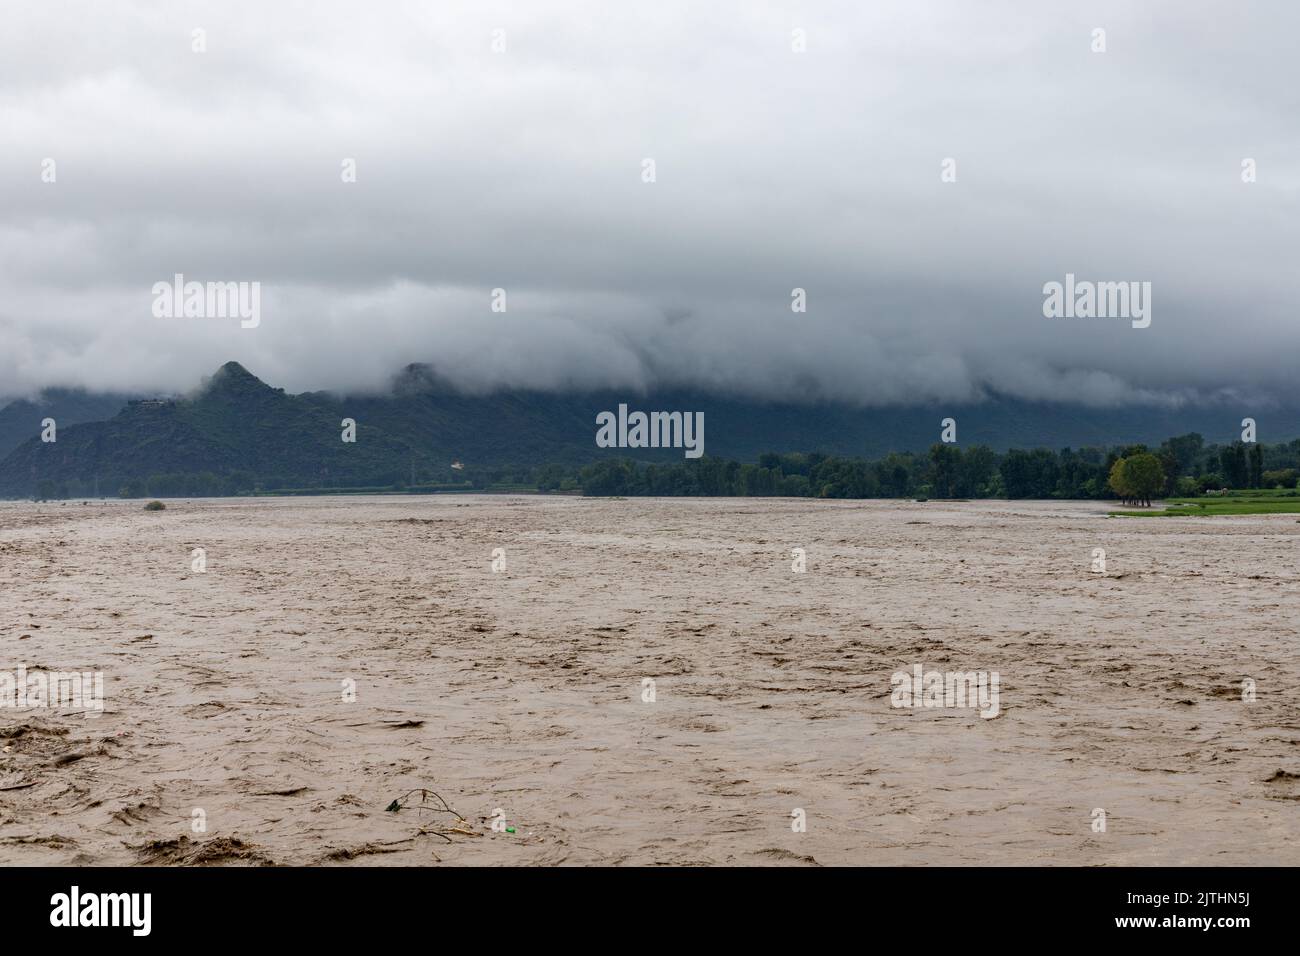 Heavy flood in the valley wash away crops and fields nearby the river bank Stock Photo